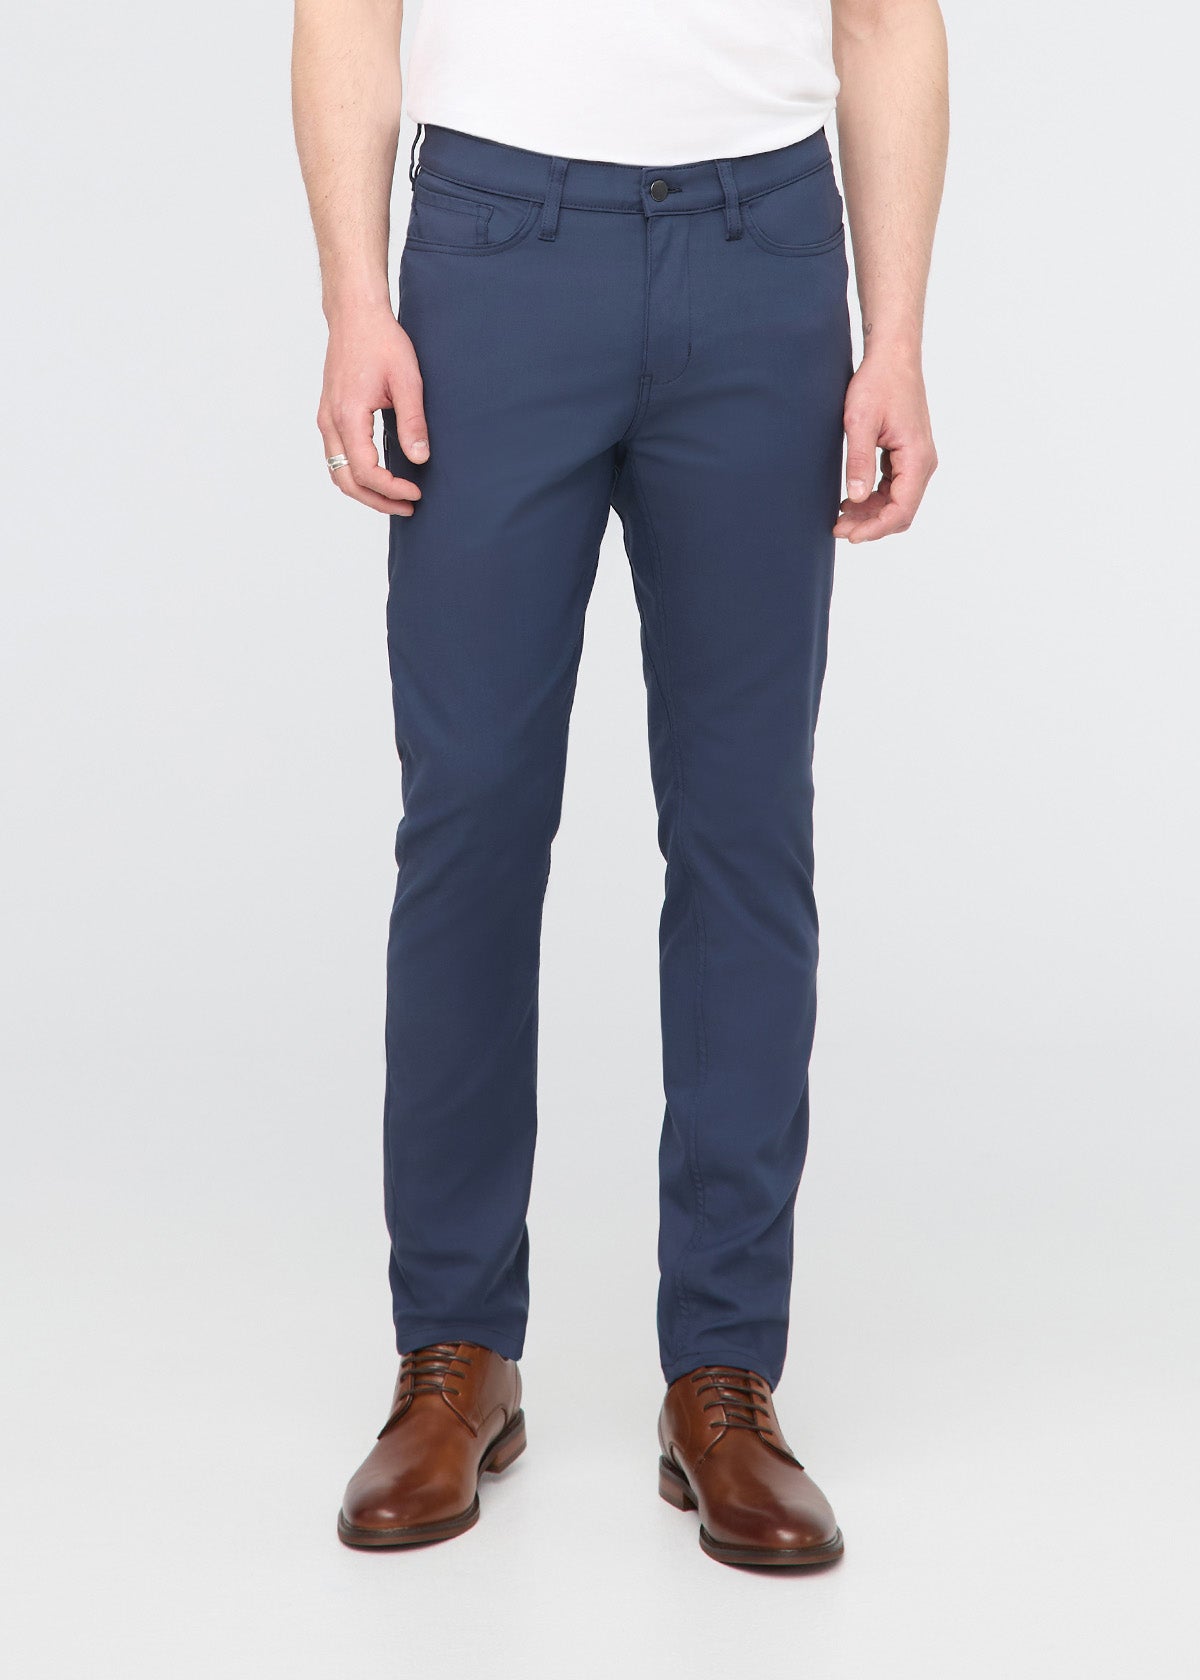 mens navy slim fit stretch pant front